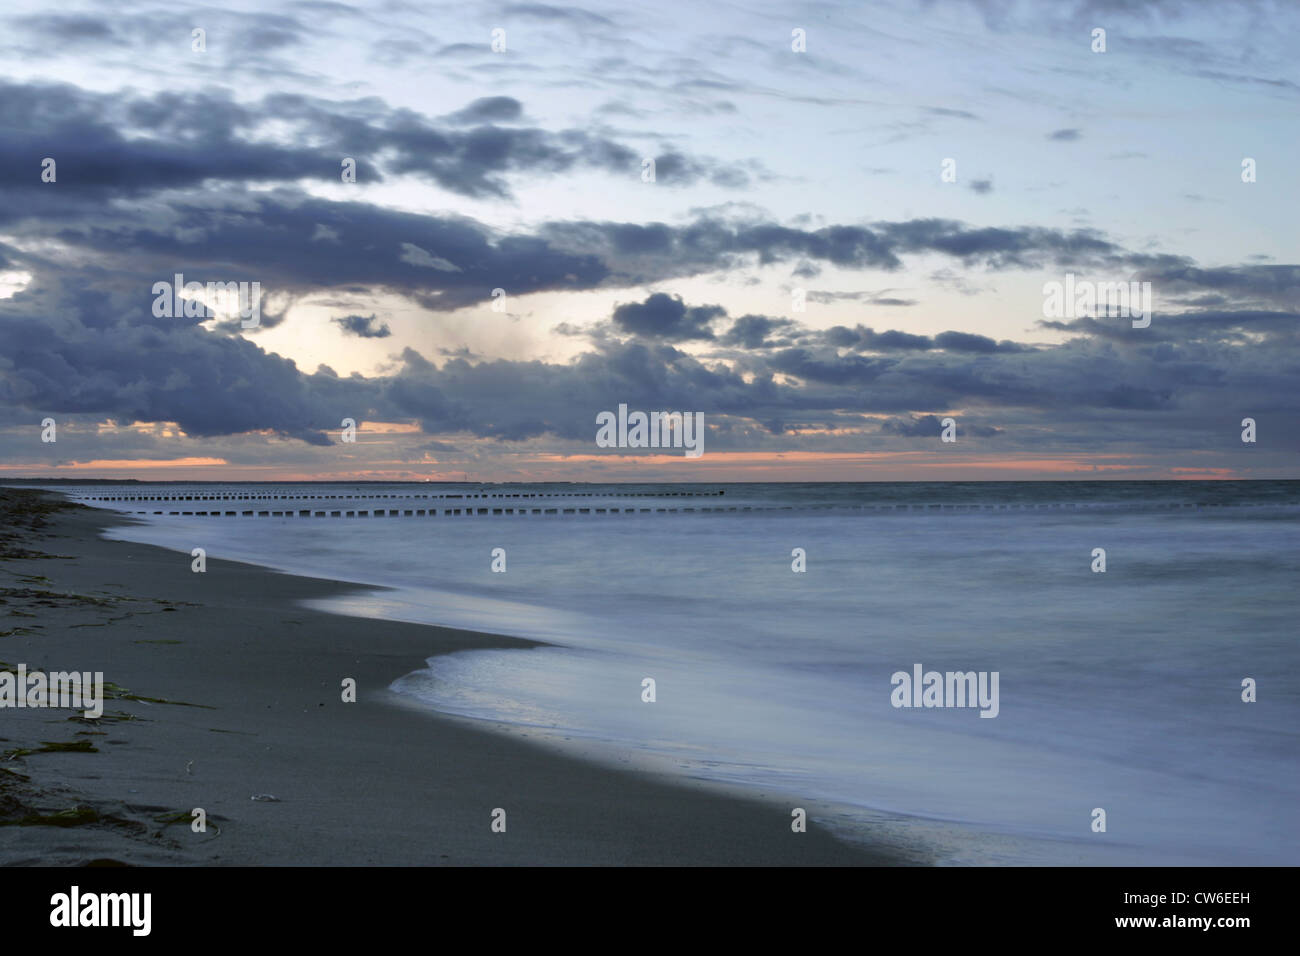 Zingst, overlooking the Baltic Sea in the evening Stock Photo